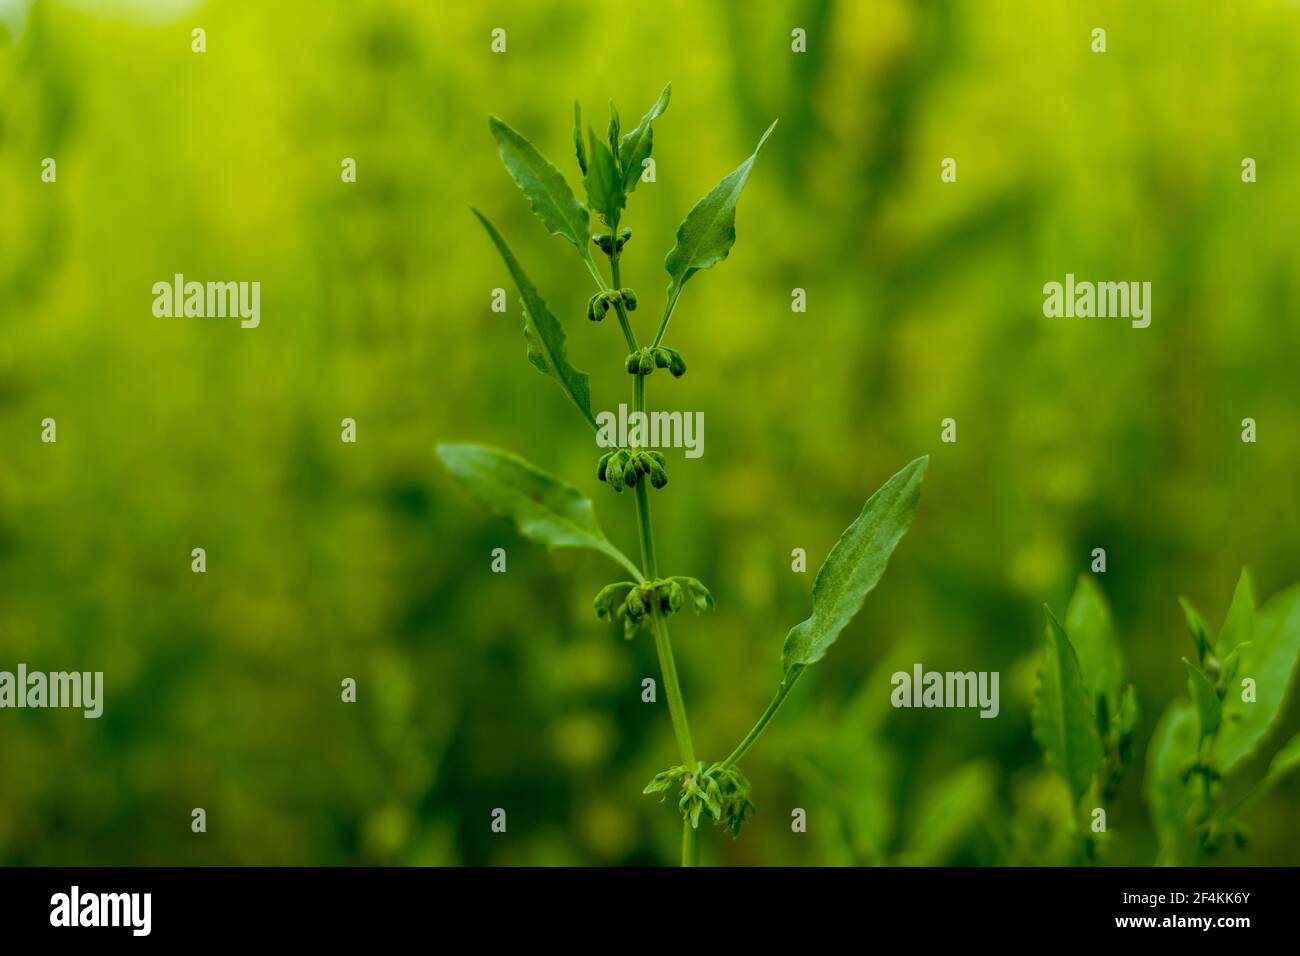 The wild grass plant that name is Dysphania ambrosioides or Mosyakin and Clemants Stock Photo